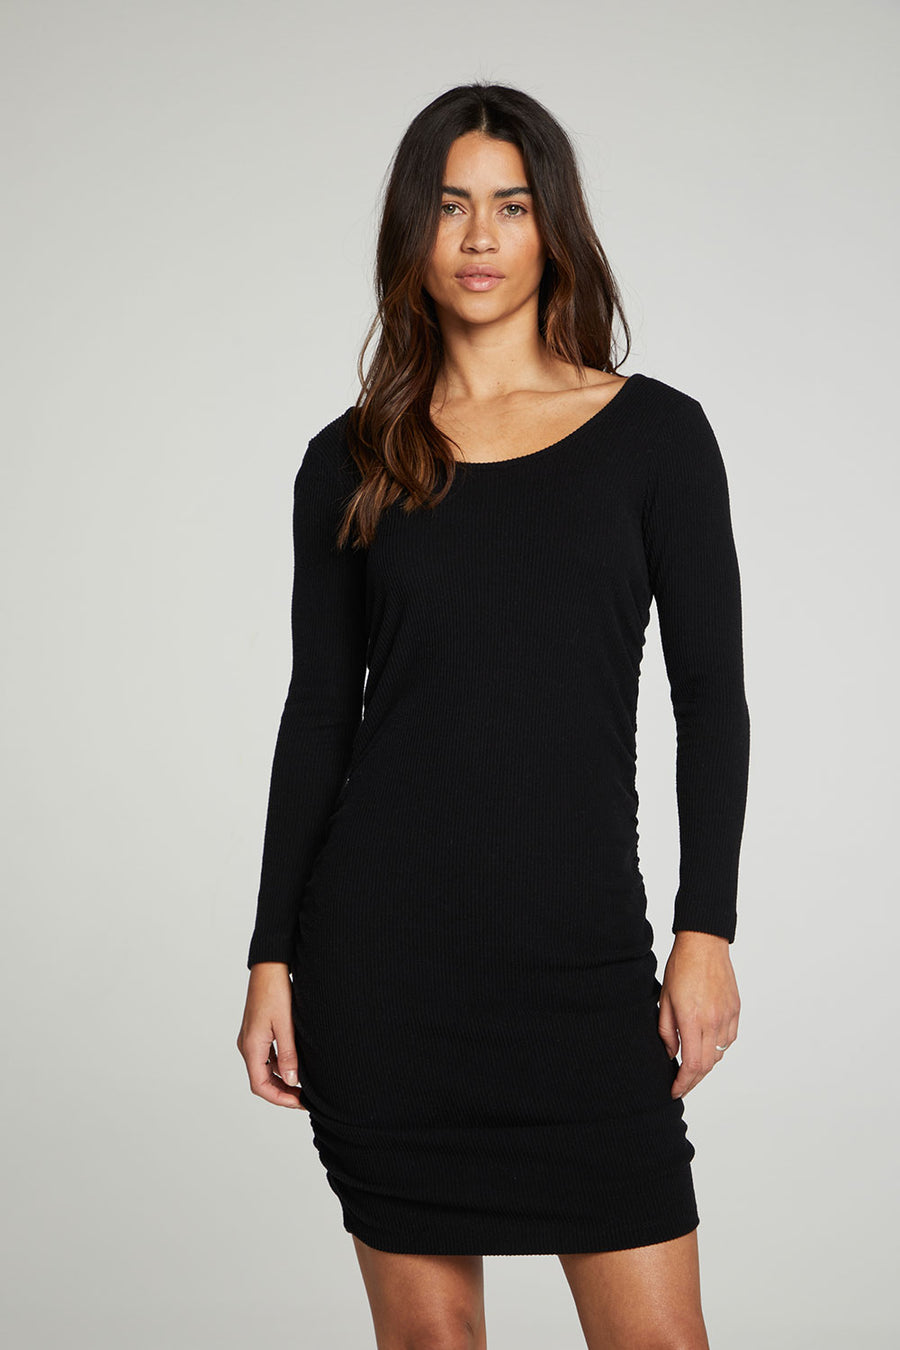 Double Scoop Long Sleeve Shirred Dress WOMENS chaserbrand